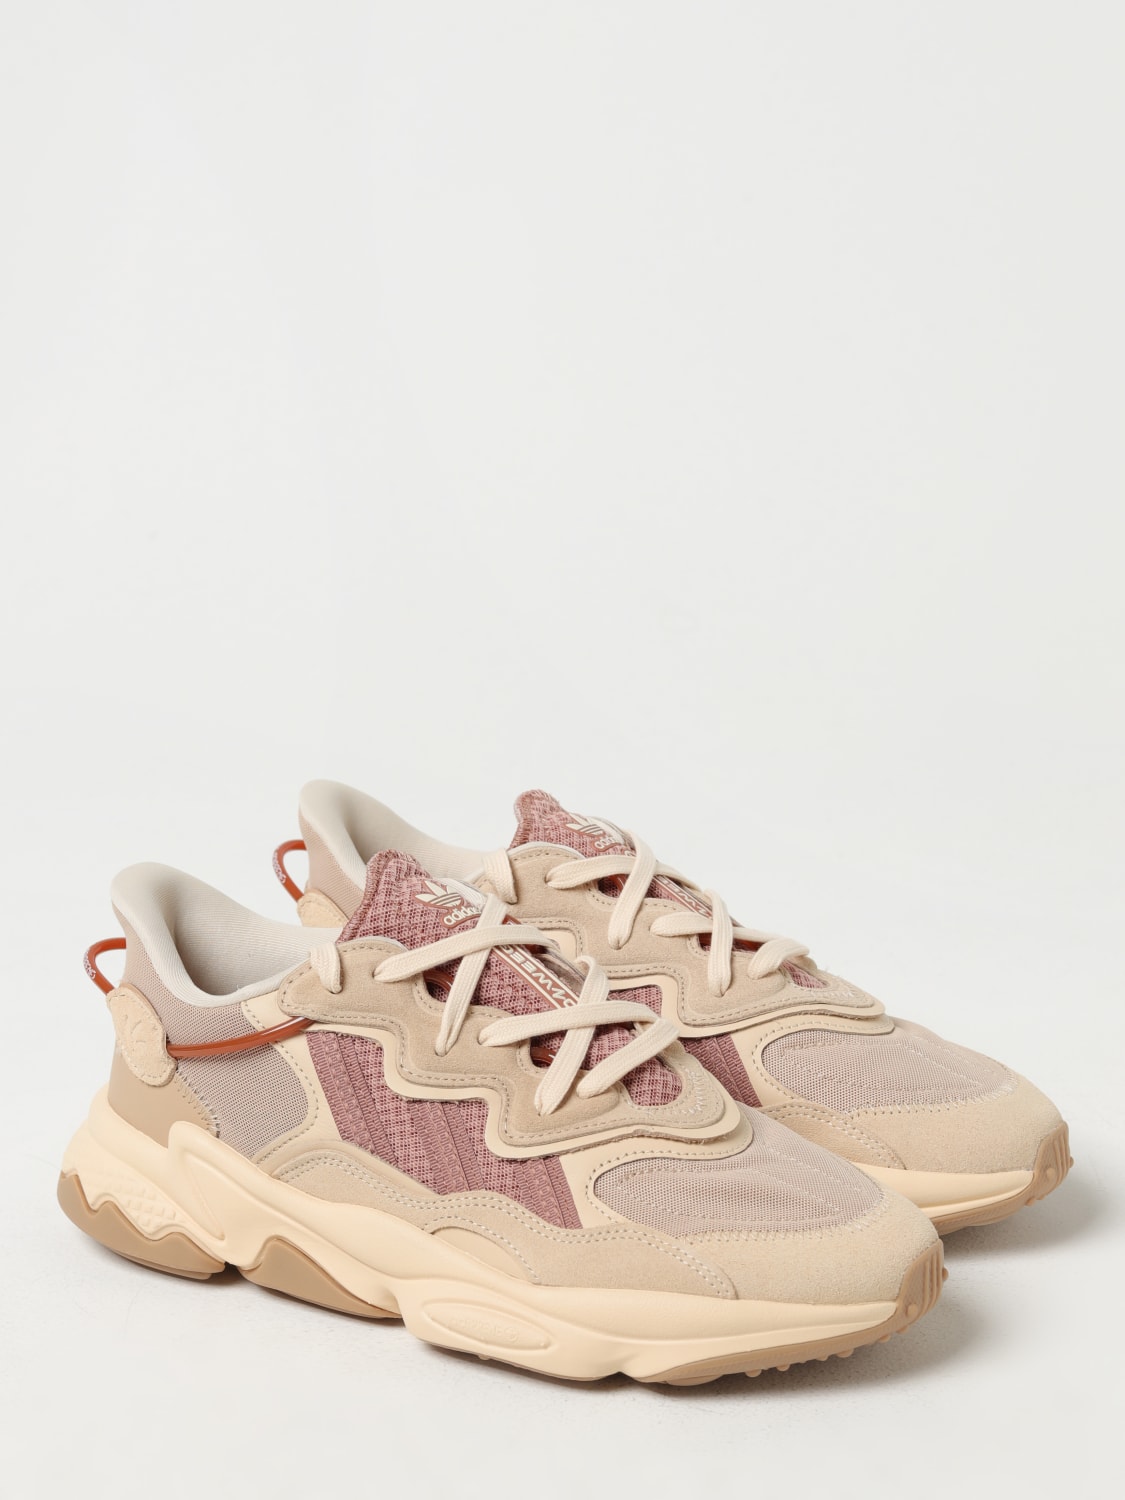 suede ORIGINALS: sneakers Ozweego and ID9821 online Beige in Originals - ADIDAS Adidas mesh | sneakers at